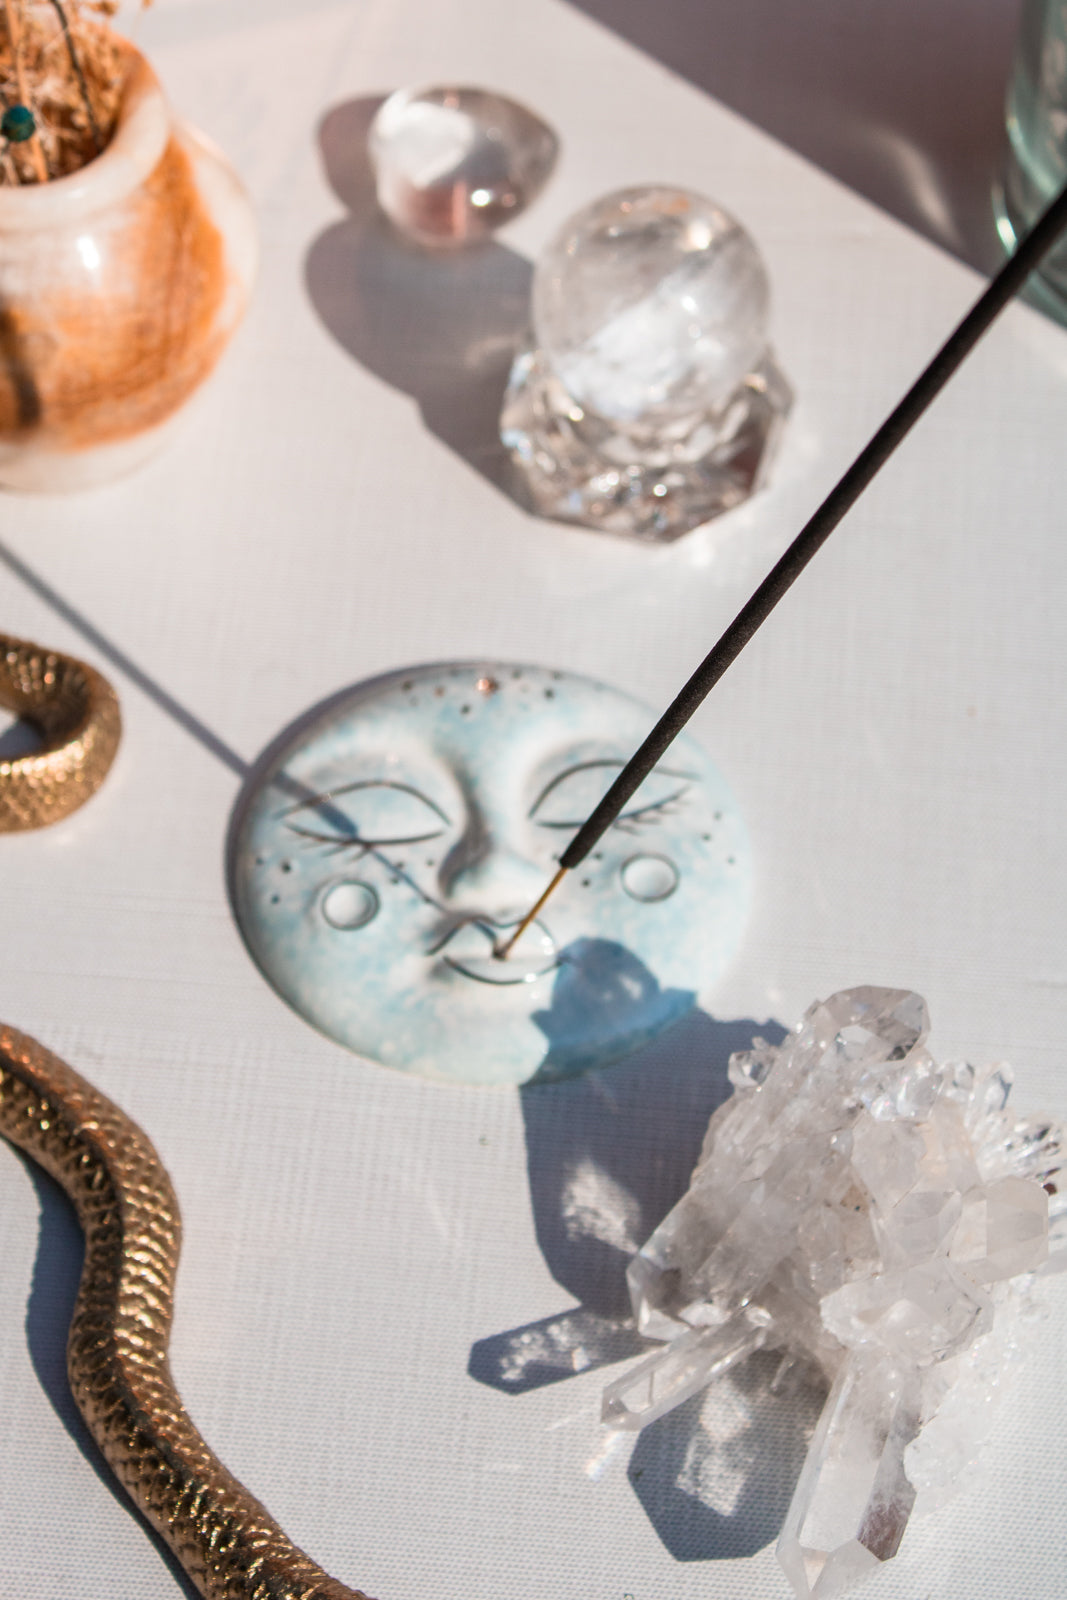 Lifestyle shot shows a celestial moon incense holder holds a stick of incense. Various healing crystals and decorative accents surround the spread.